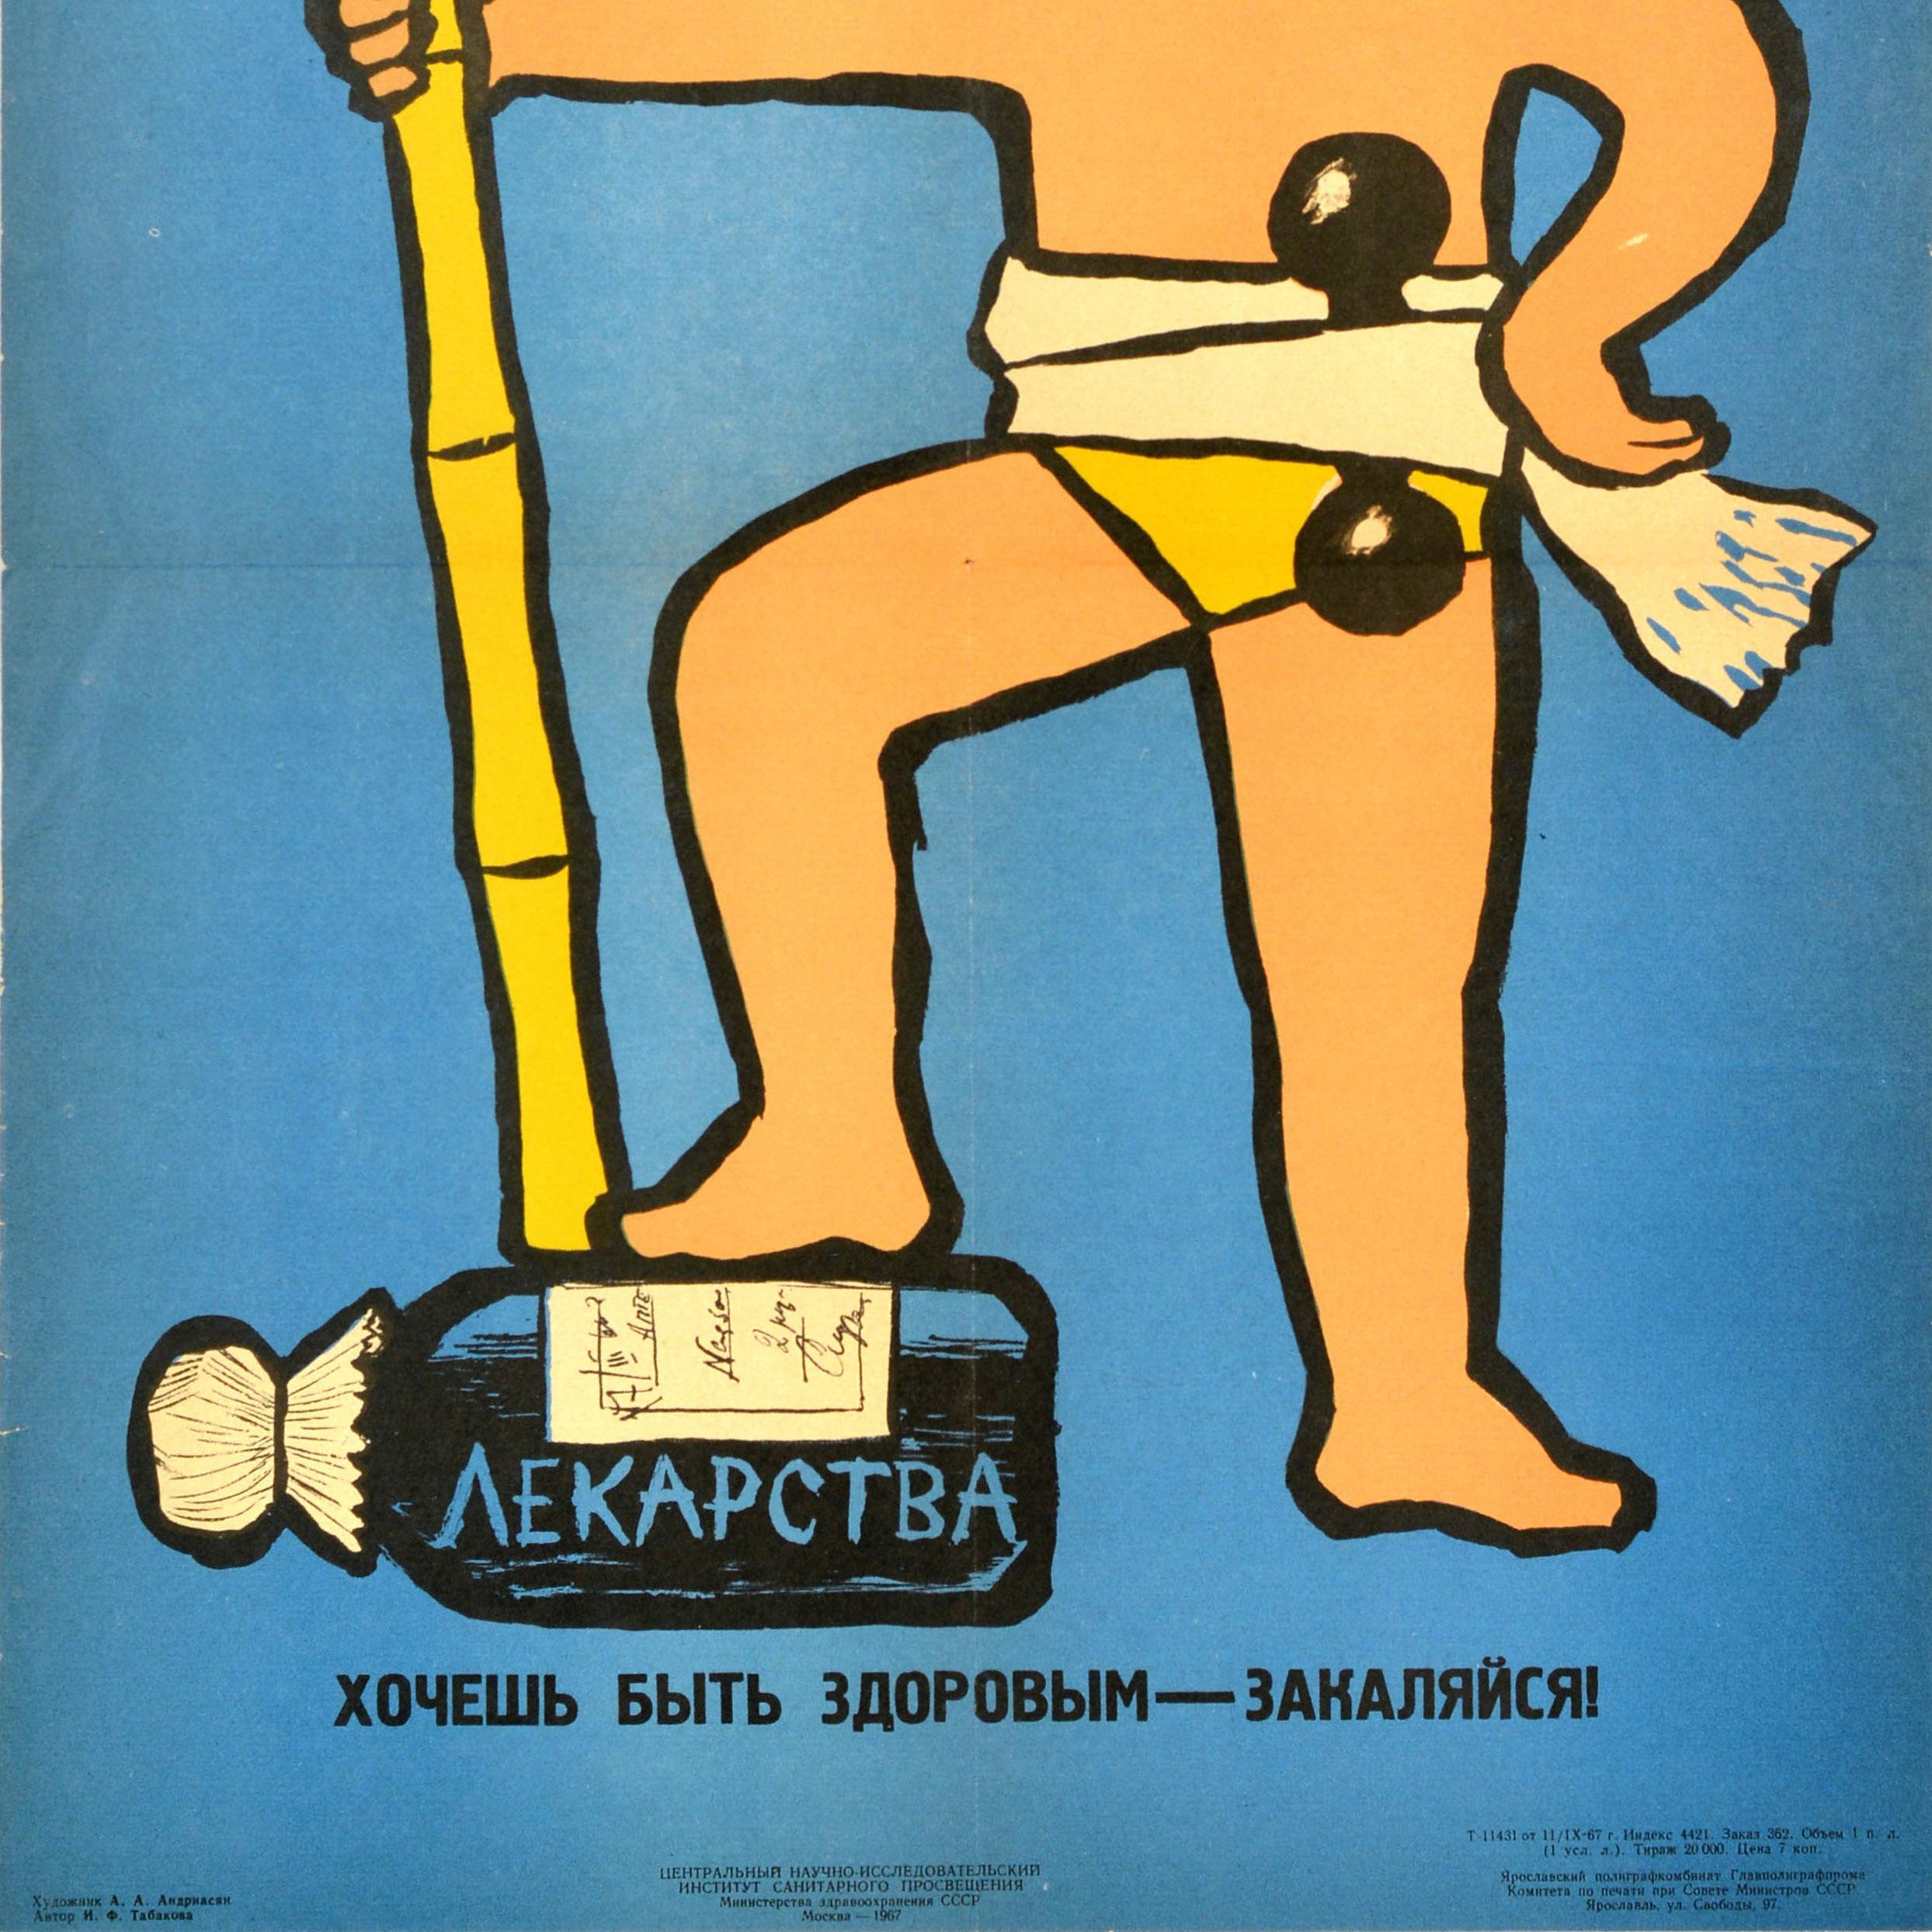 Original vintage Soviet health propaganda poster - If you want to be healthy, do cold training - featuring an illustration of a smiling young boy wearing a colourful striped swimming cap with a dumbbell tied to his waist and holding a ski pole while